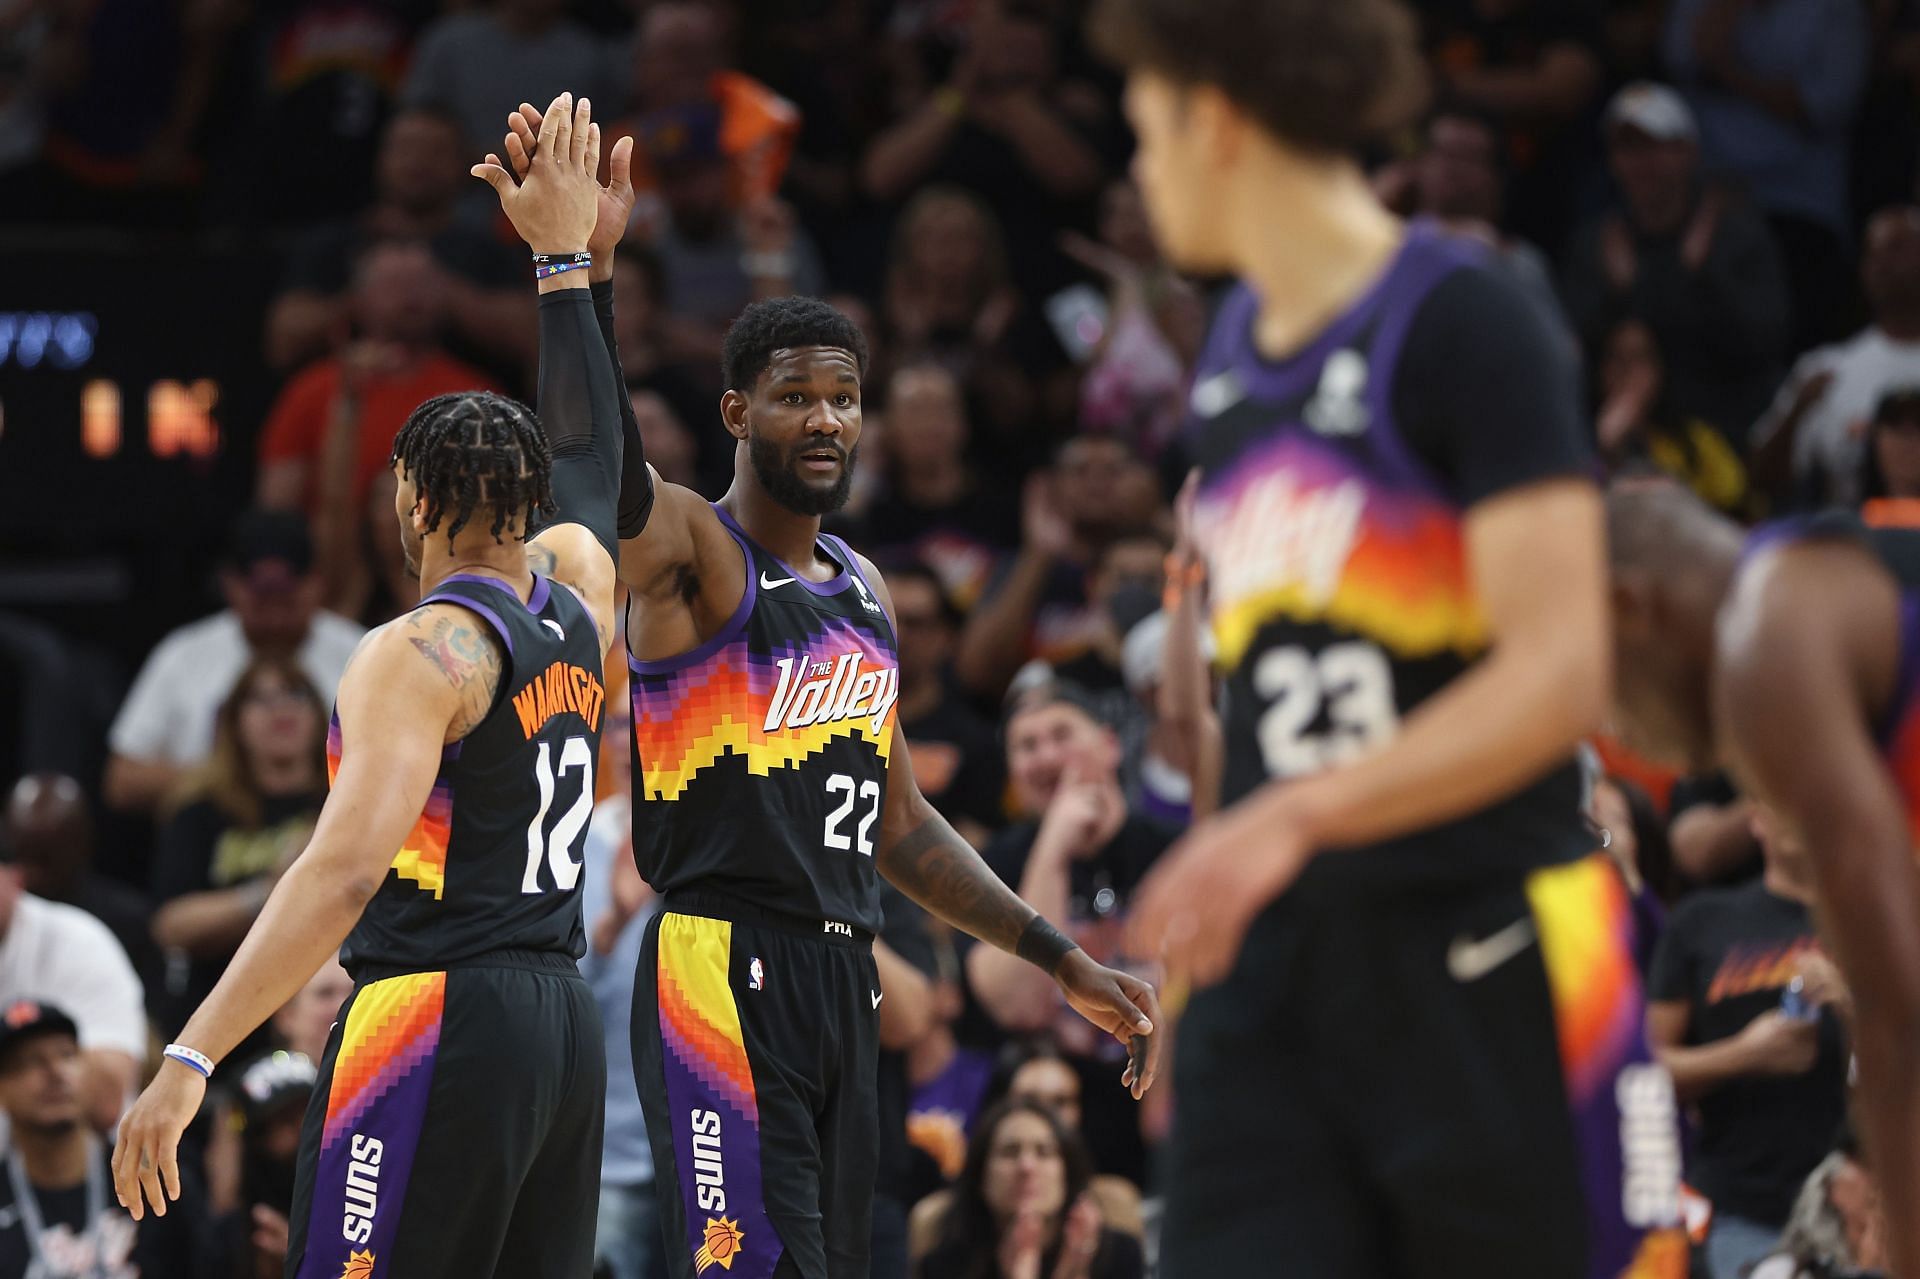 Suns officially have a Big 3 as Deandre Ayton makes history